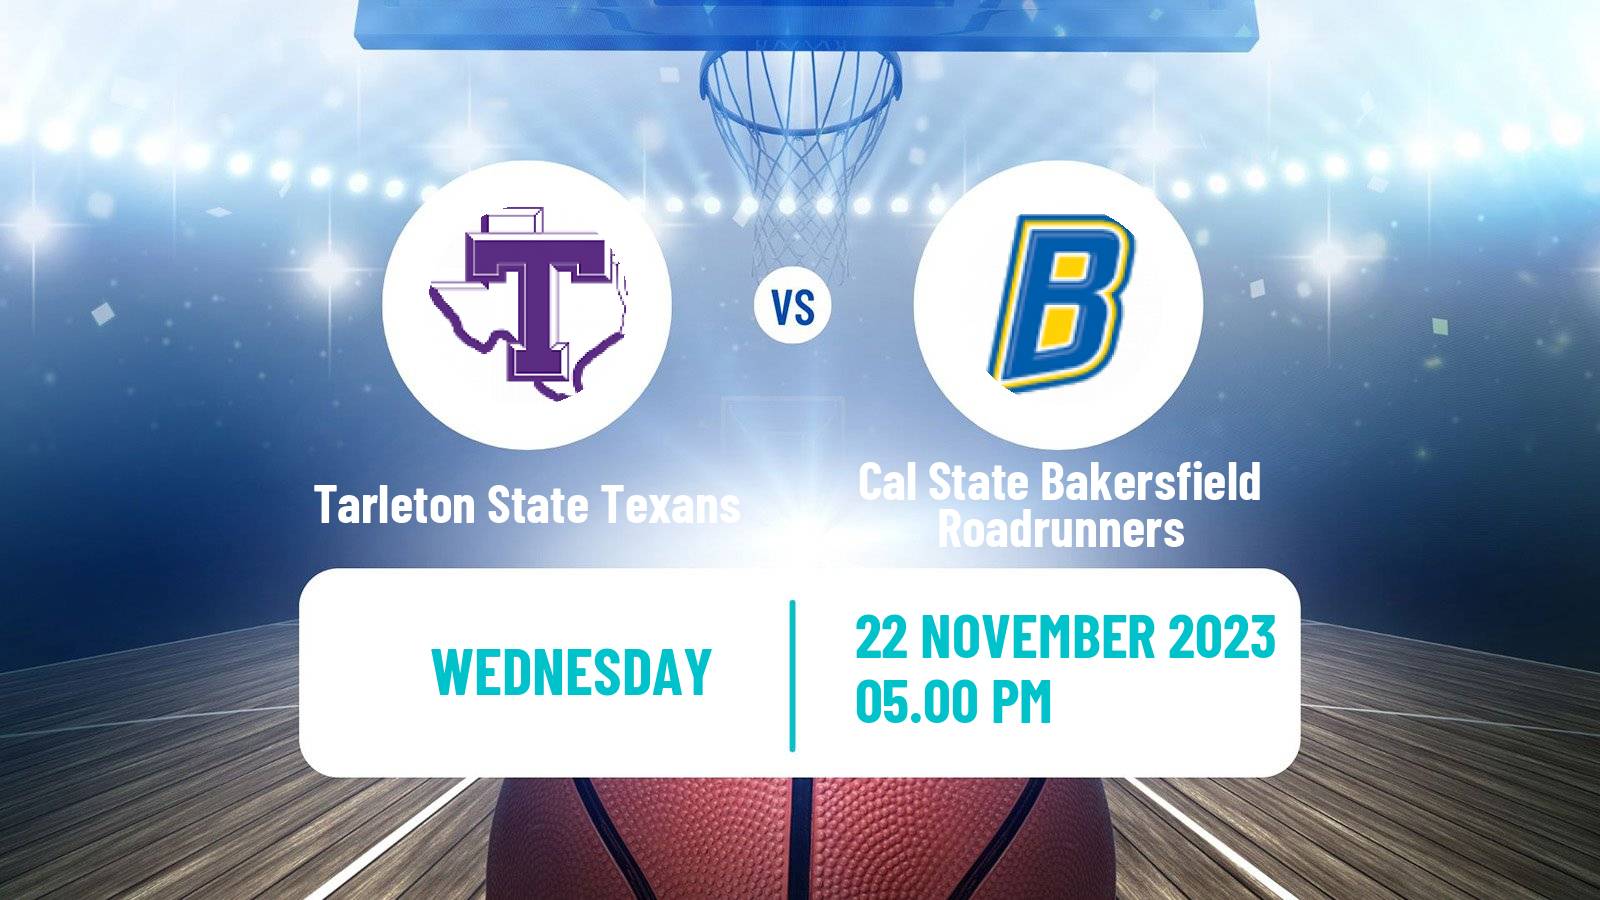 Basketball NCAA College Basketball Tarleton State Texans - Cal State Bakersfield Roadrunners